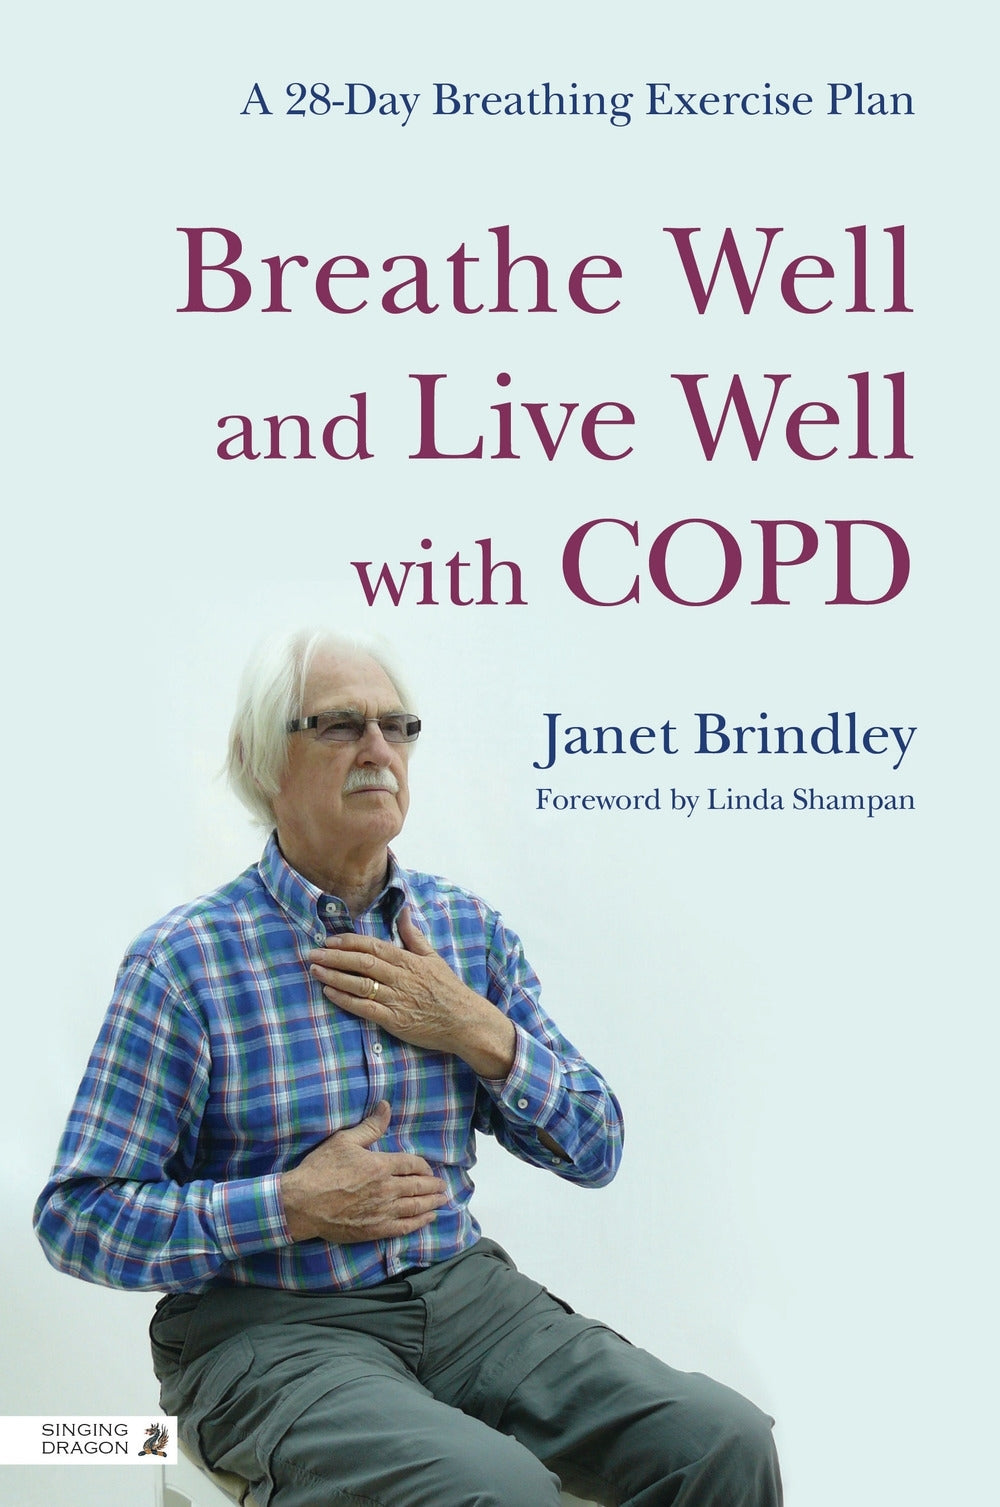 Breathe Well and Live Well with COPD by Janet Brindley, Linda Shampan